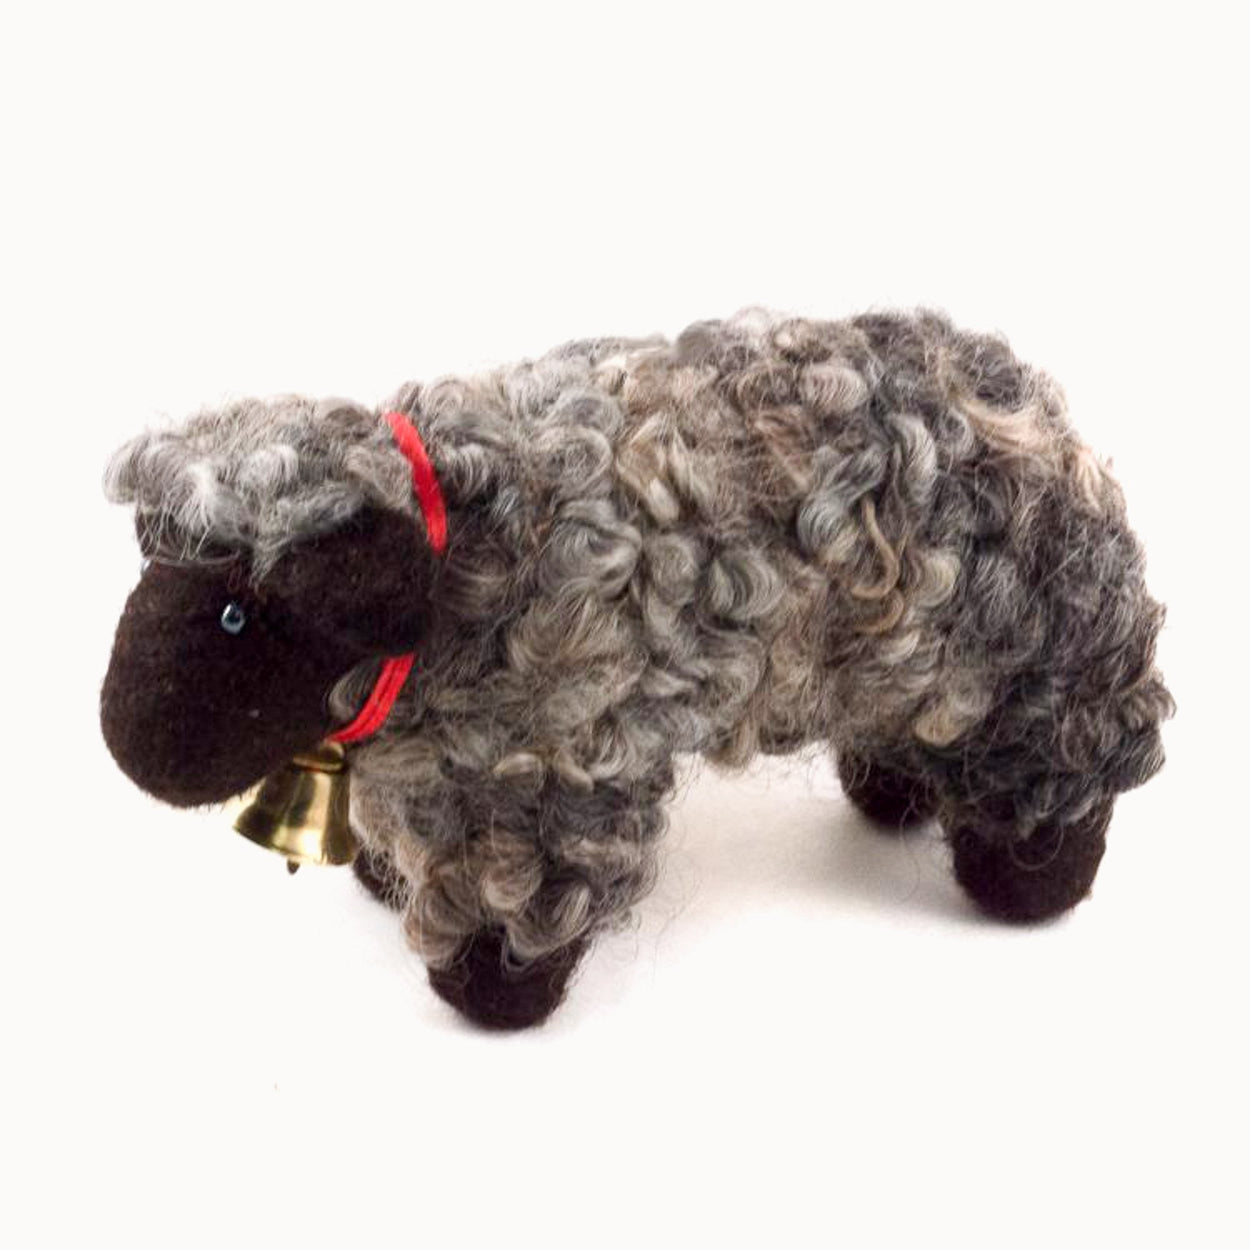 Felted Wool Sheep For Kids Mayan Hands 